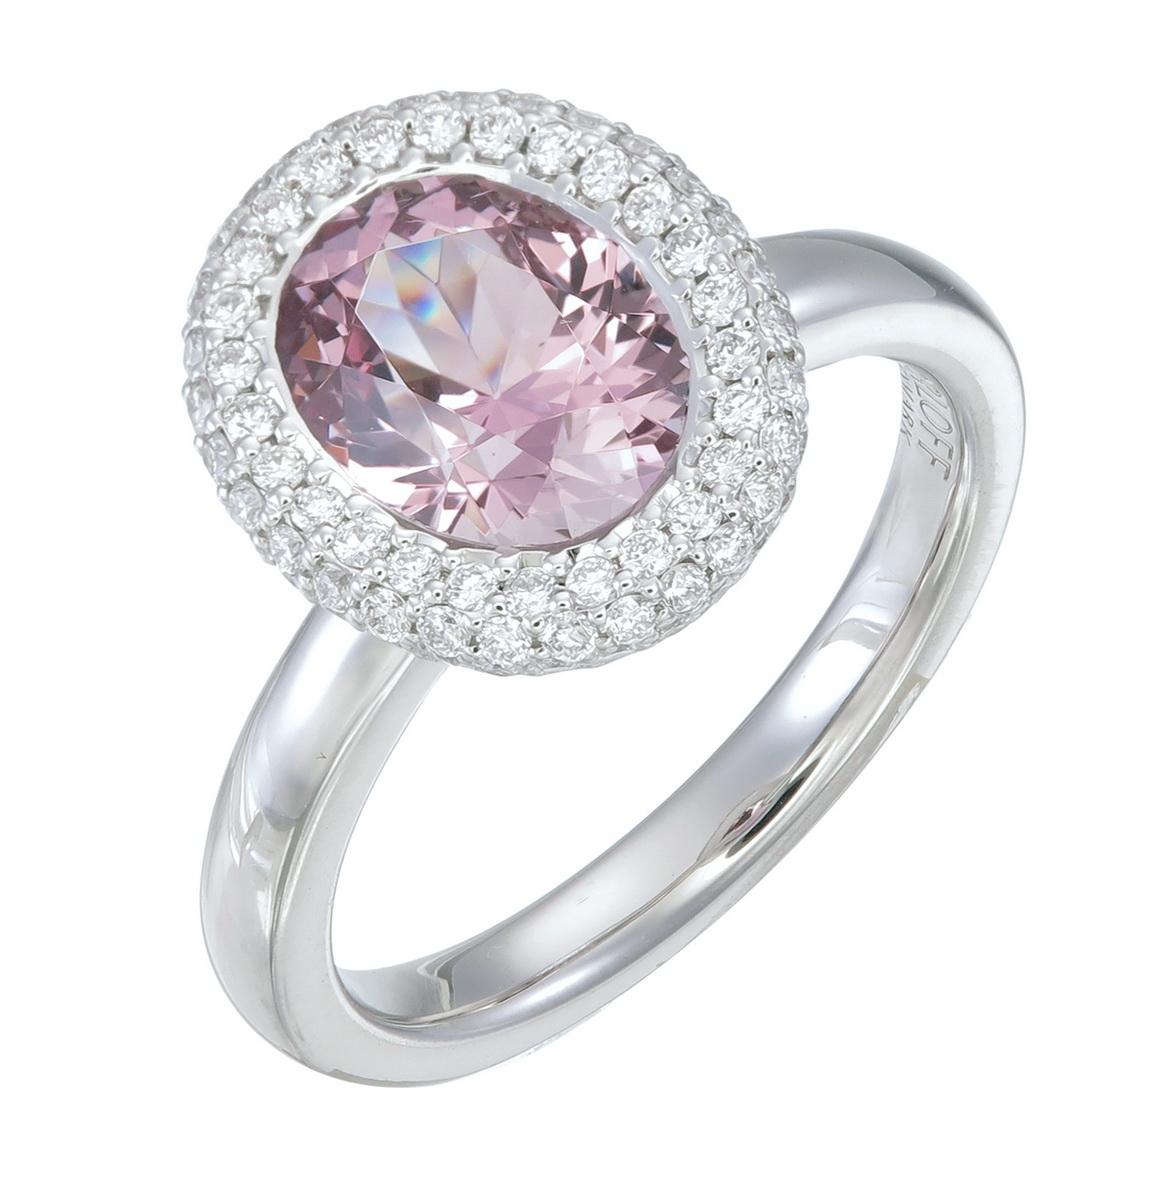 Orloff of Denmark's very own 'Blush Nimbus'
The stone originates from the rough mountainous terrain Tajikistan, which is renowned for the it's sensational pink spinels known for its soothing light pink color and stunning brilliance.
Along with the